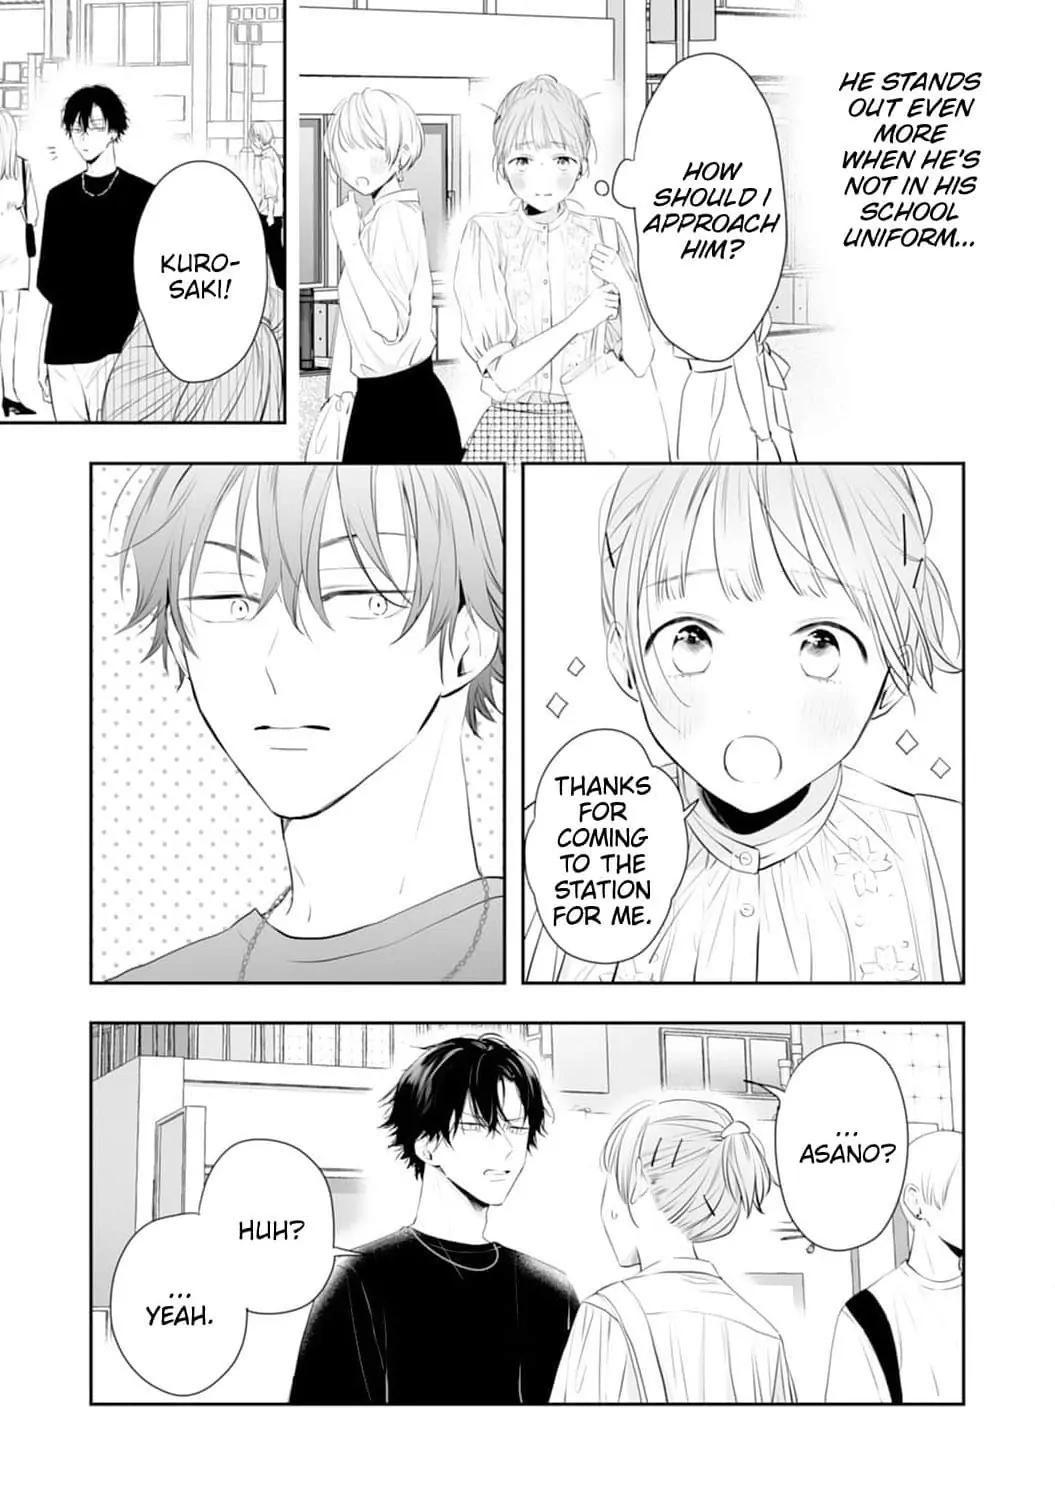 Kurosaki Wants Me All to Himself ~The Intense Sweetness of First Love~ Chapter 3 - page 21